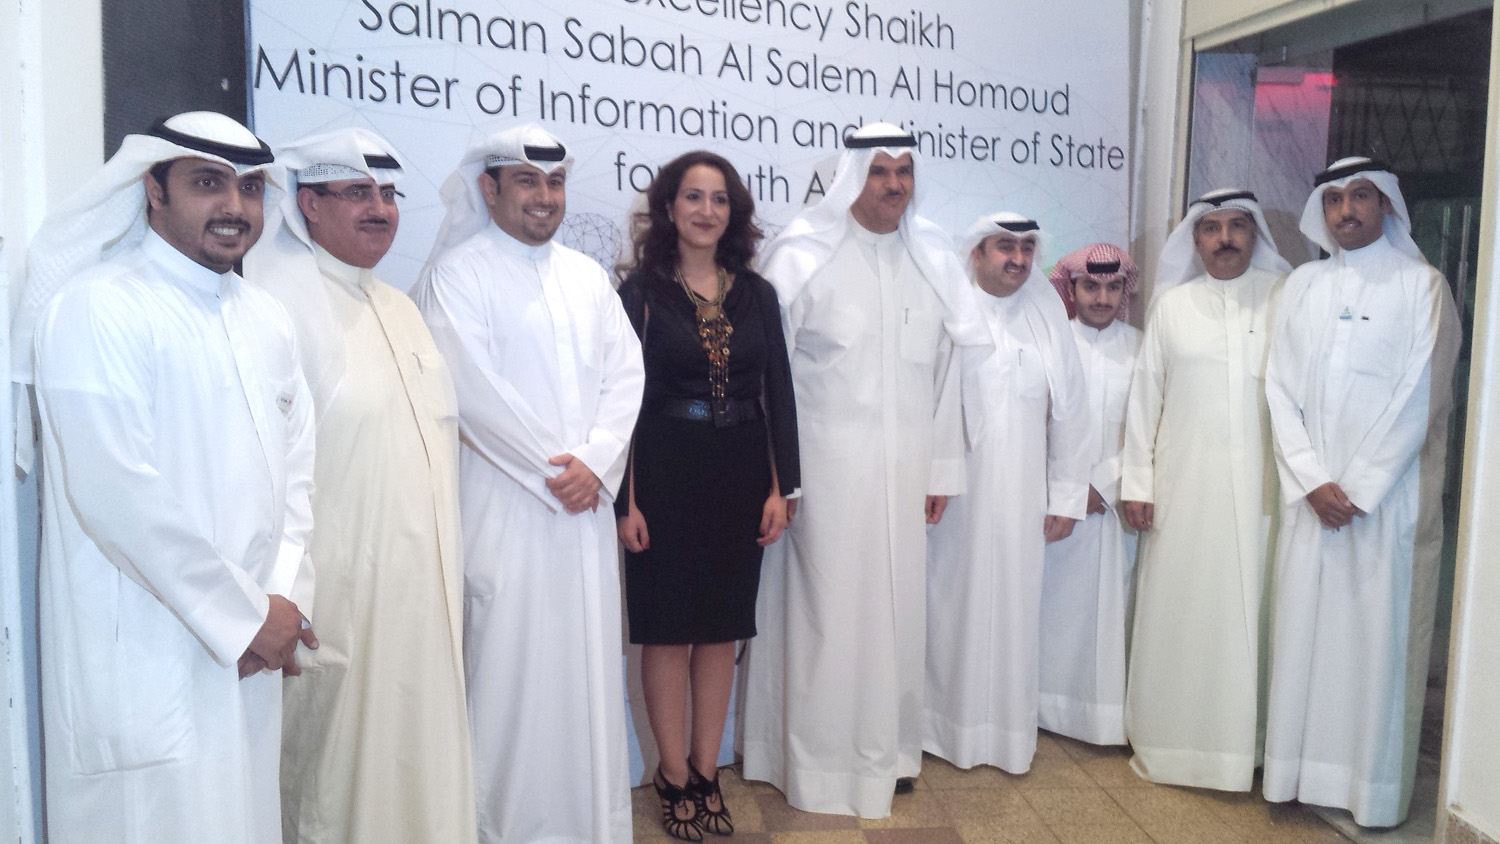 Minister of Information and State Minister for Youth Affairs Sheikh Salman Sabah Al-Sabah during the Art exhibition